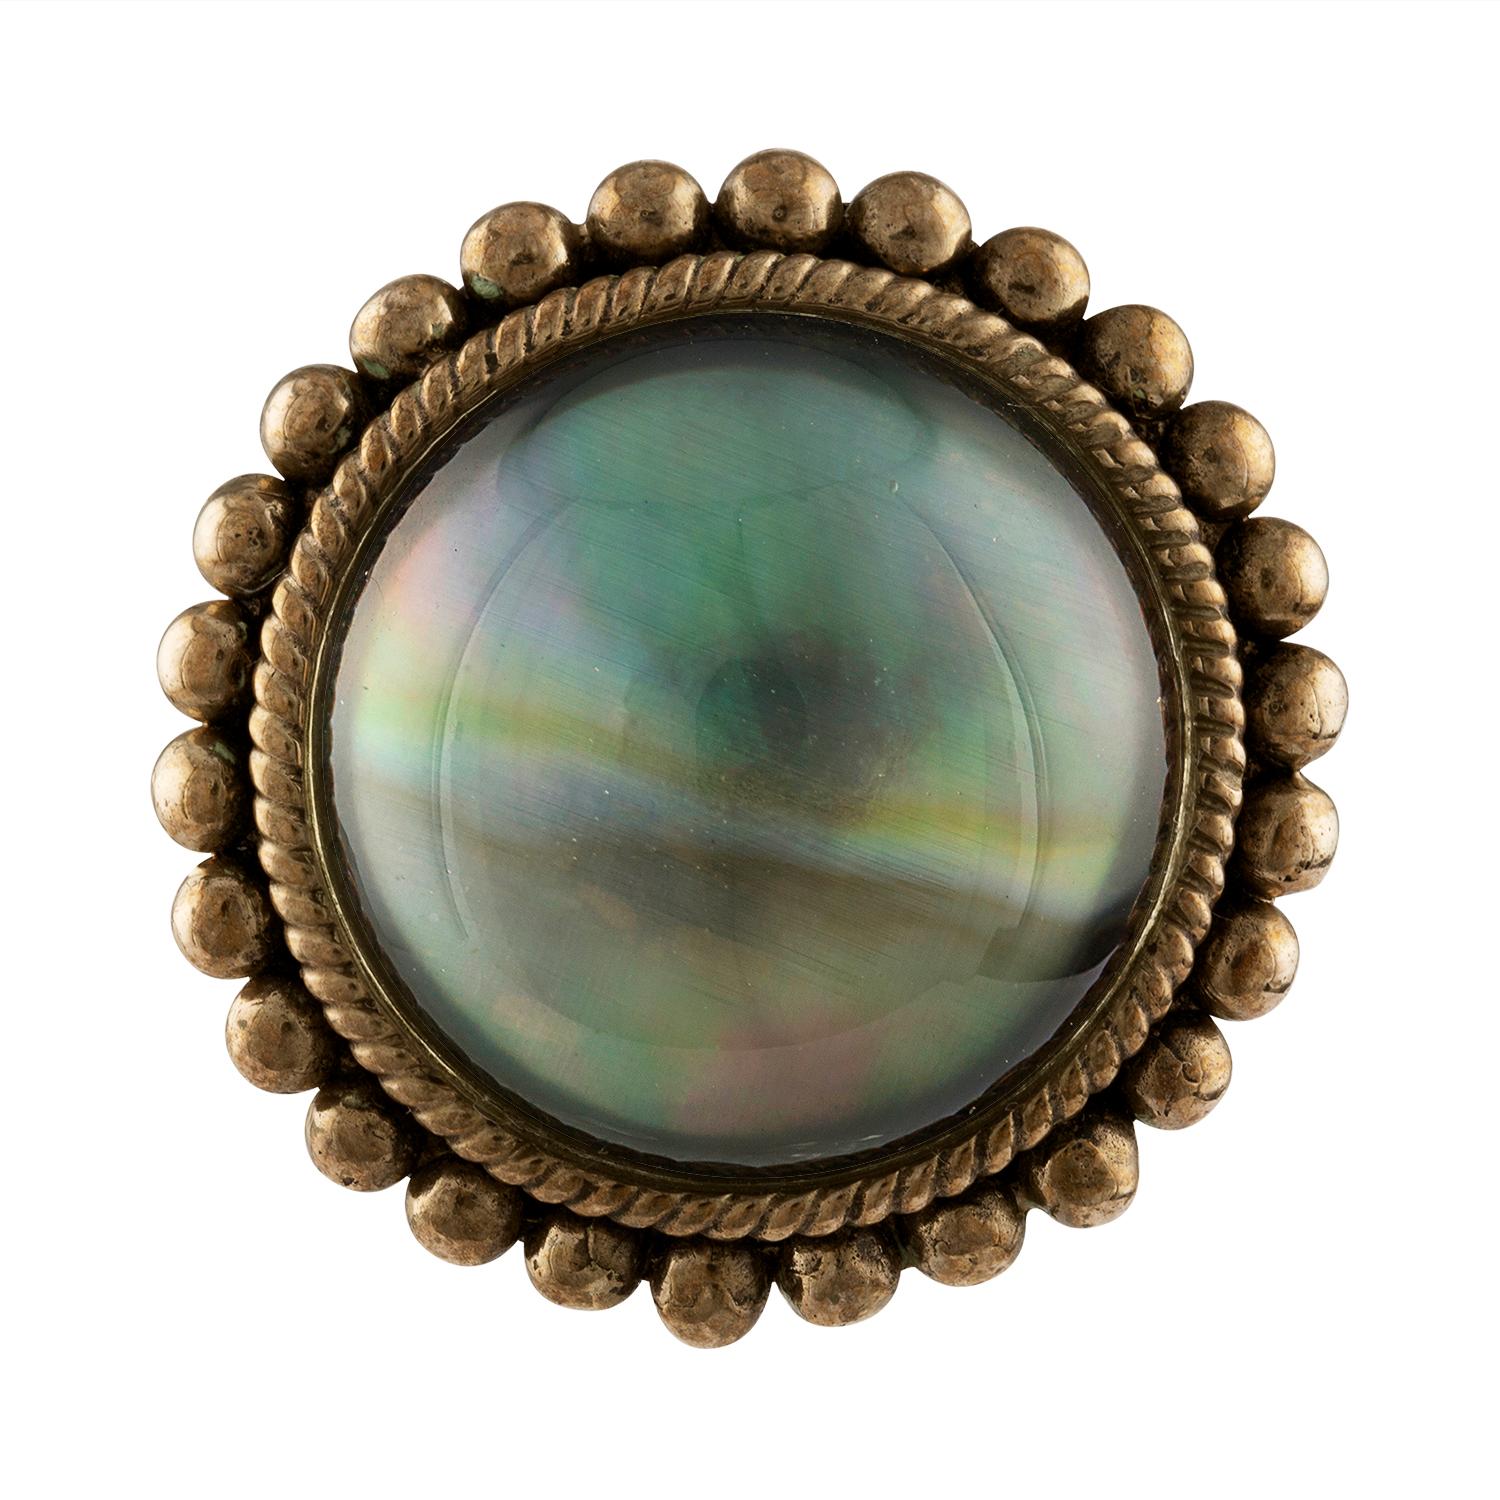 Stephen Dweck Abalone & Rock Crystal Brass Ring
The ring has a beautiful cabochon Rock Crystal over Abalone
The top of the ring is 1.25